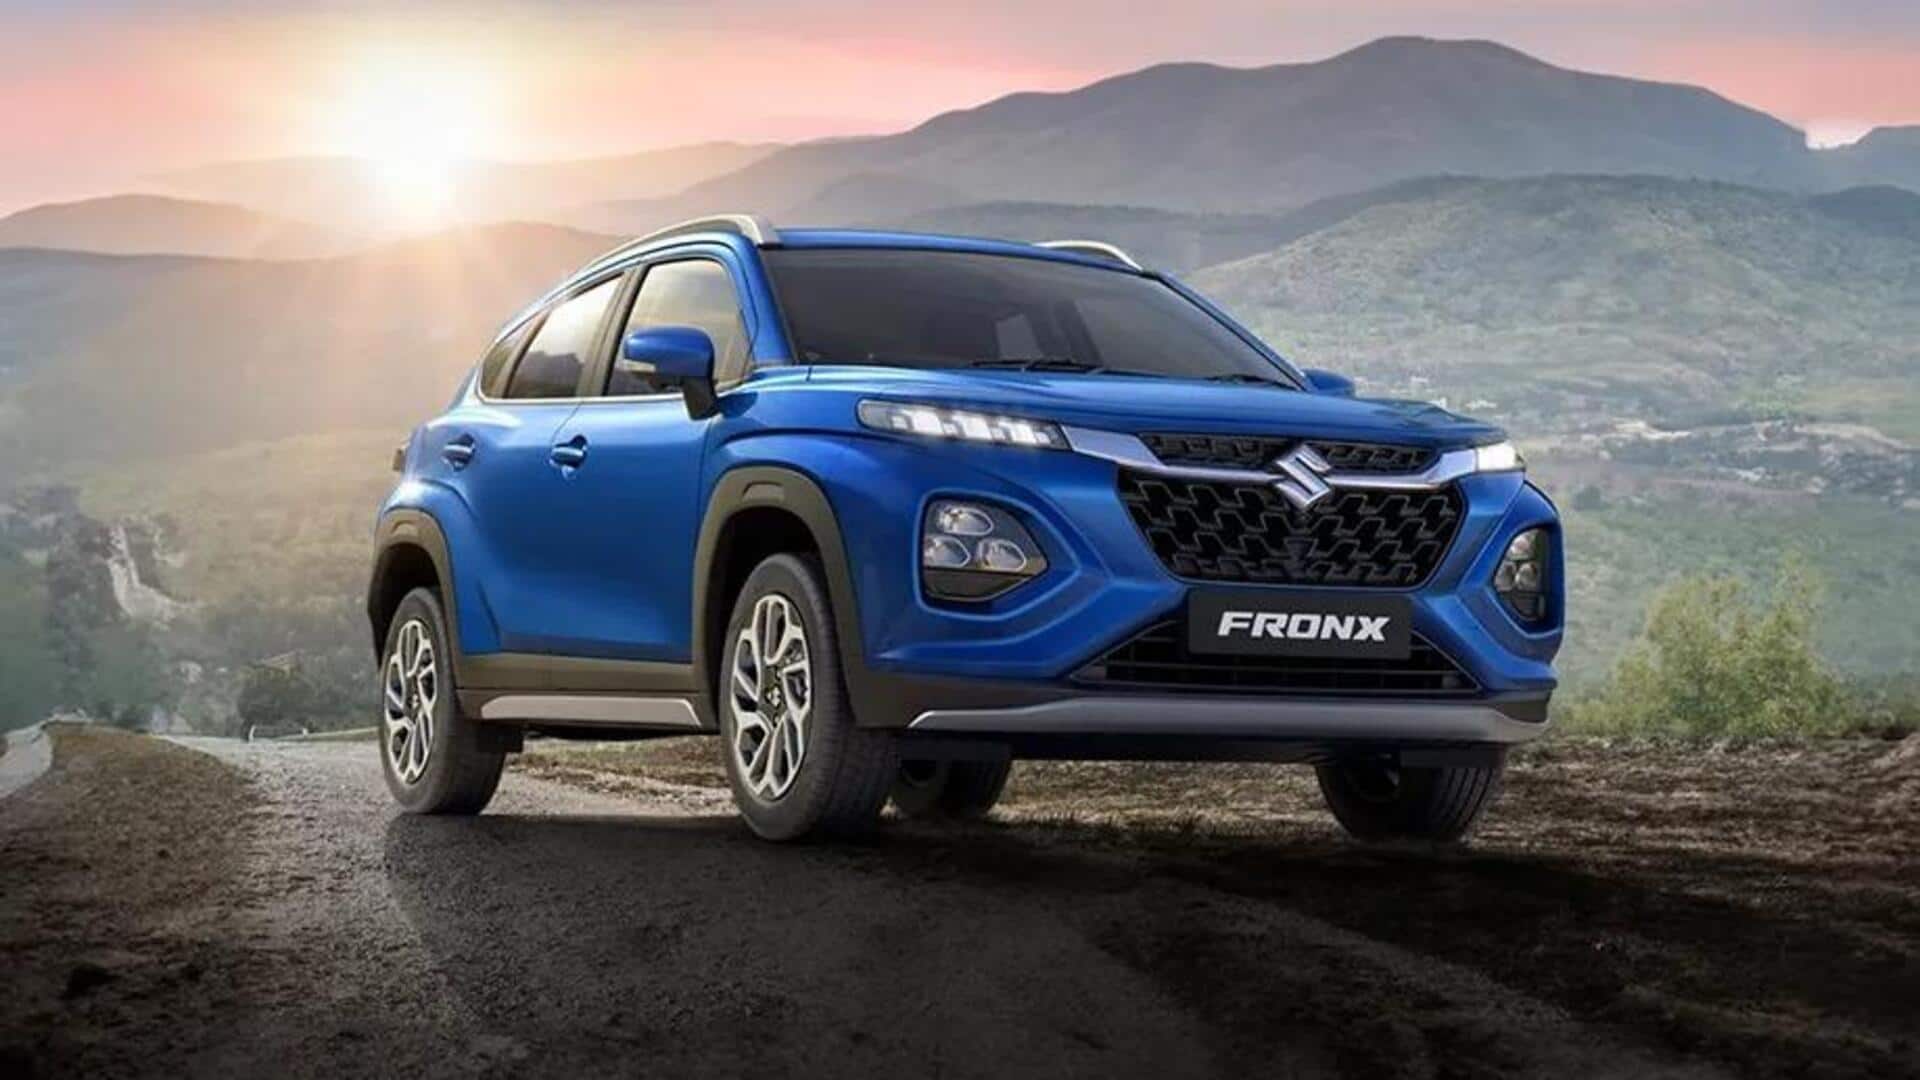 Top upcoming compact SUVs to watch out for in India